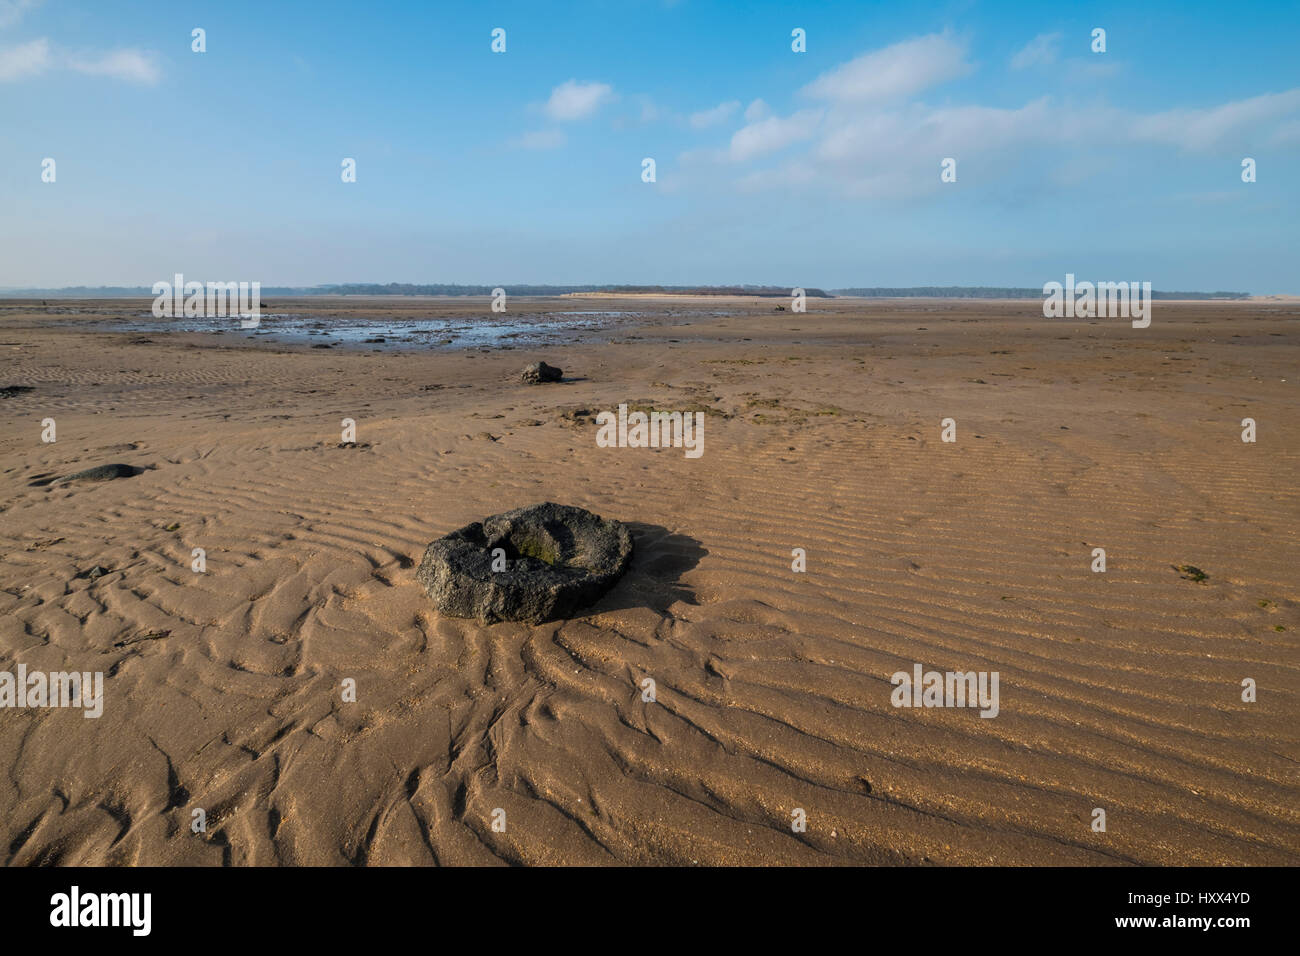 Peaceful scene at Belhaven Bay in Scotland at low tide with patterns and textures of rippled sand and an ancient round stone Stock Photo